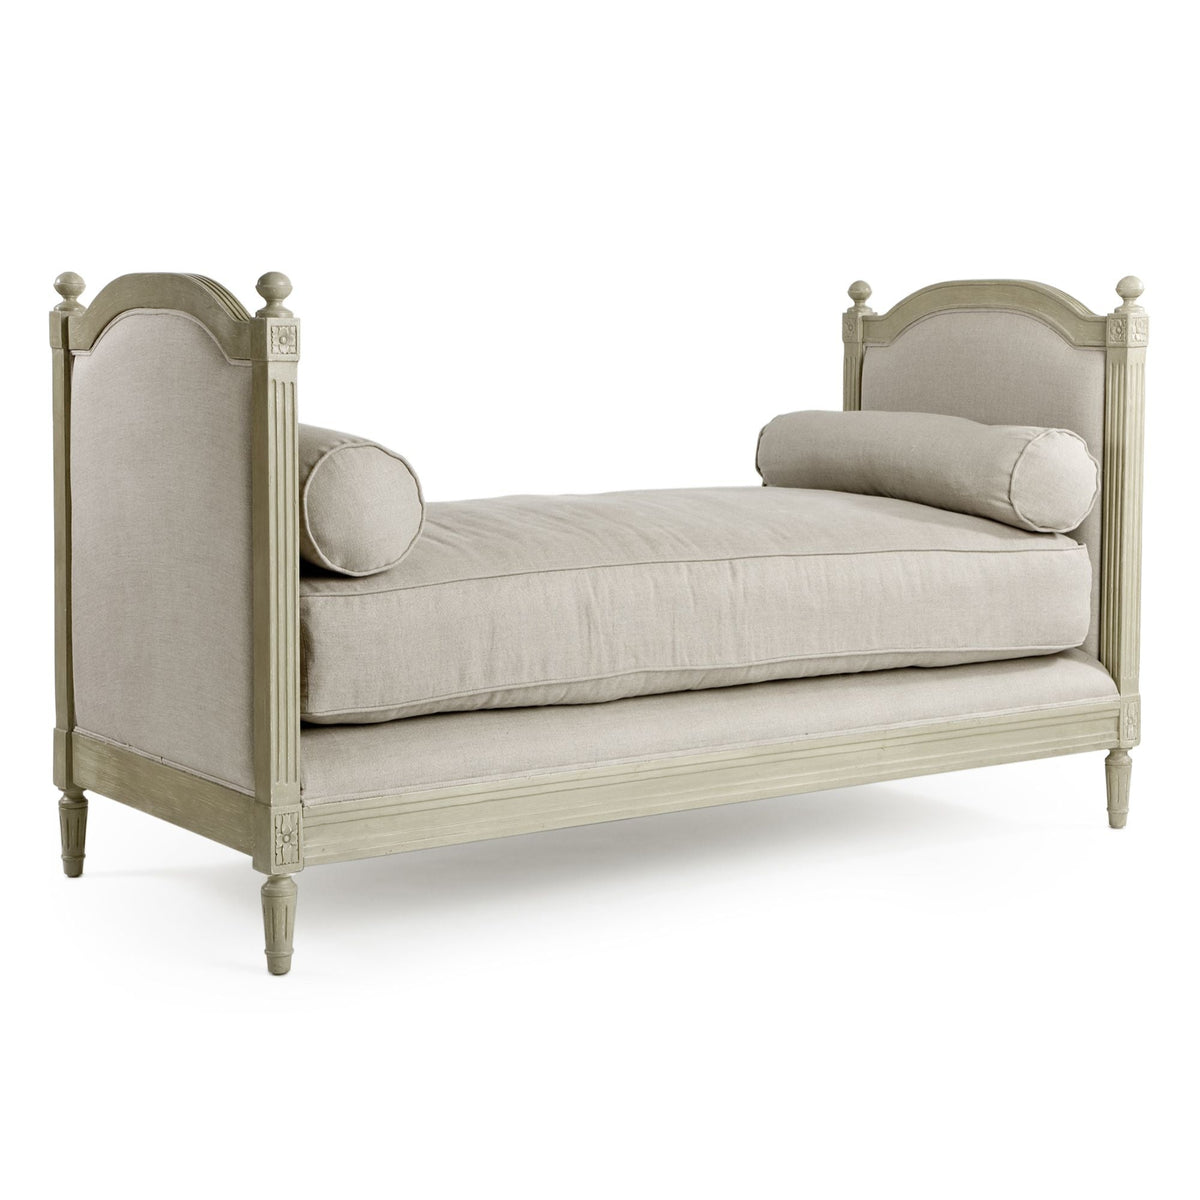 Antoinette Daybed by Zentique